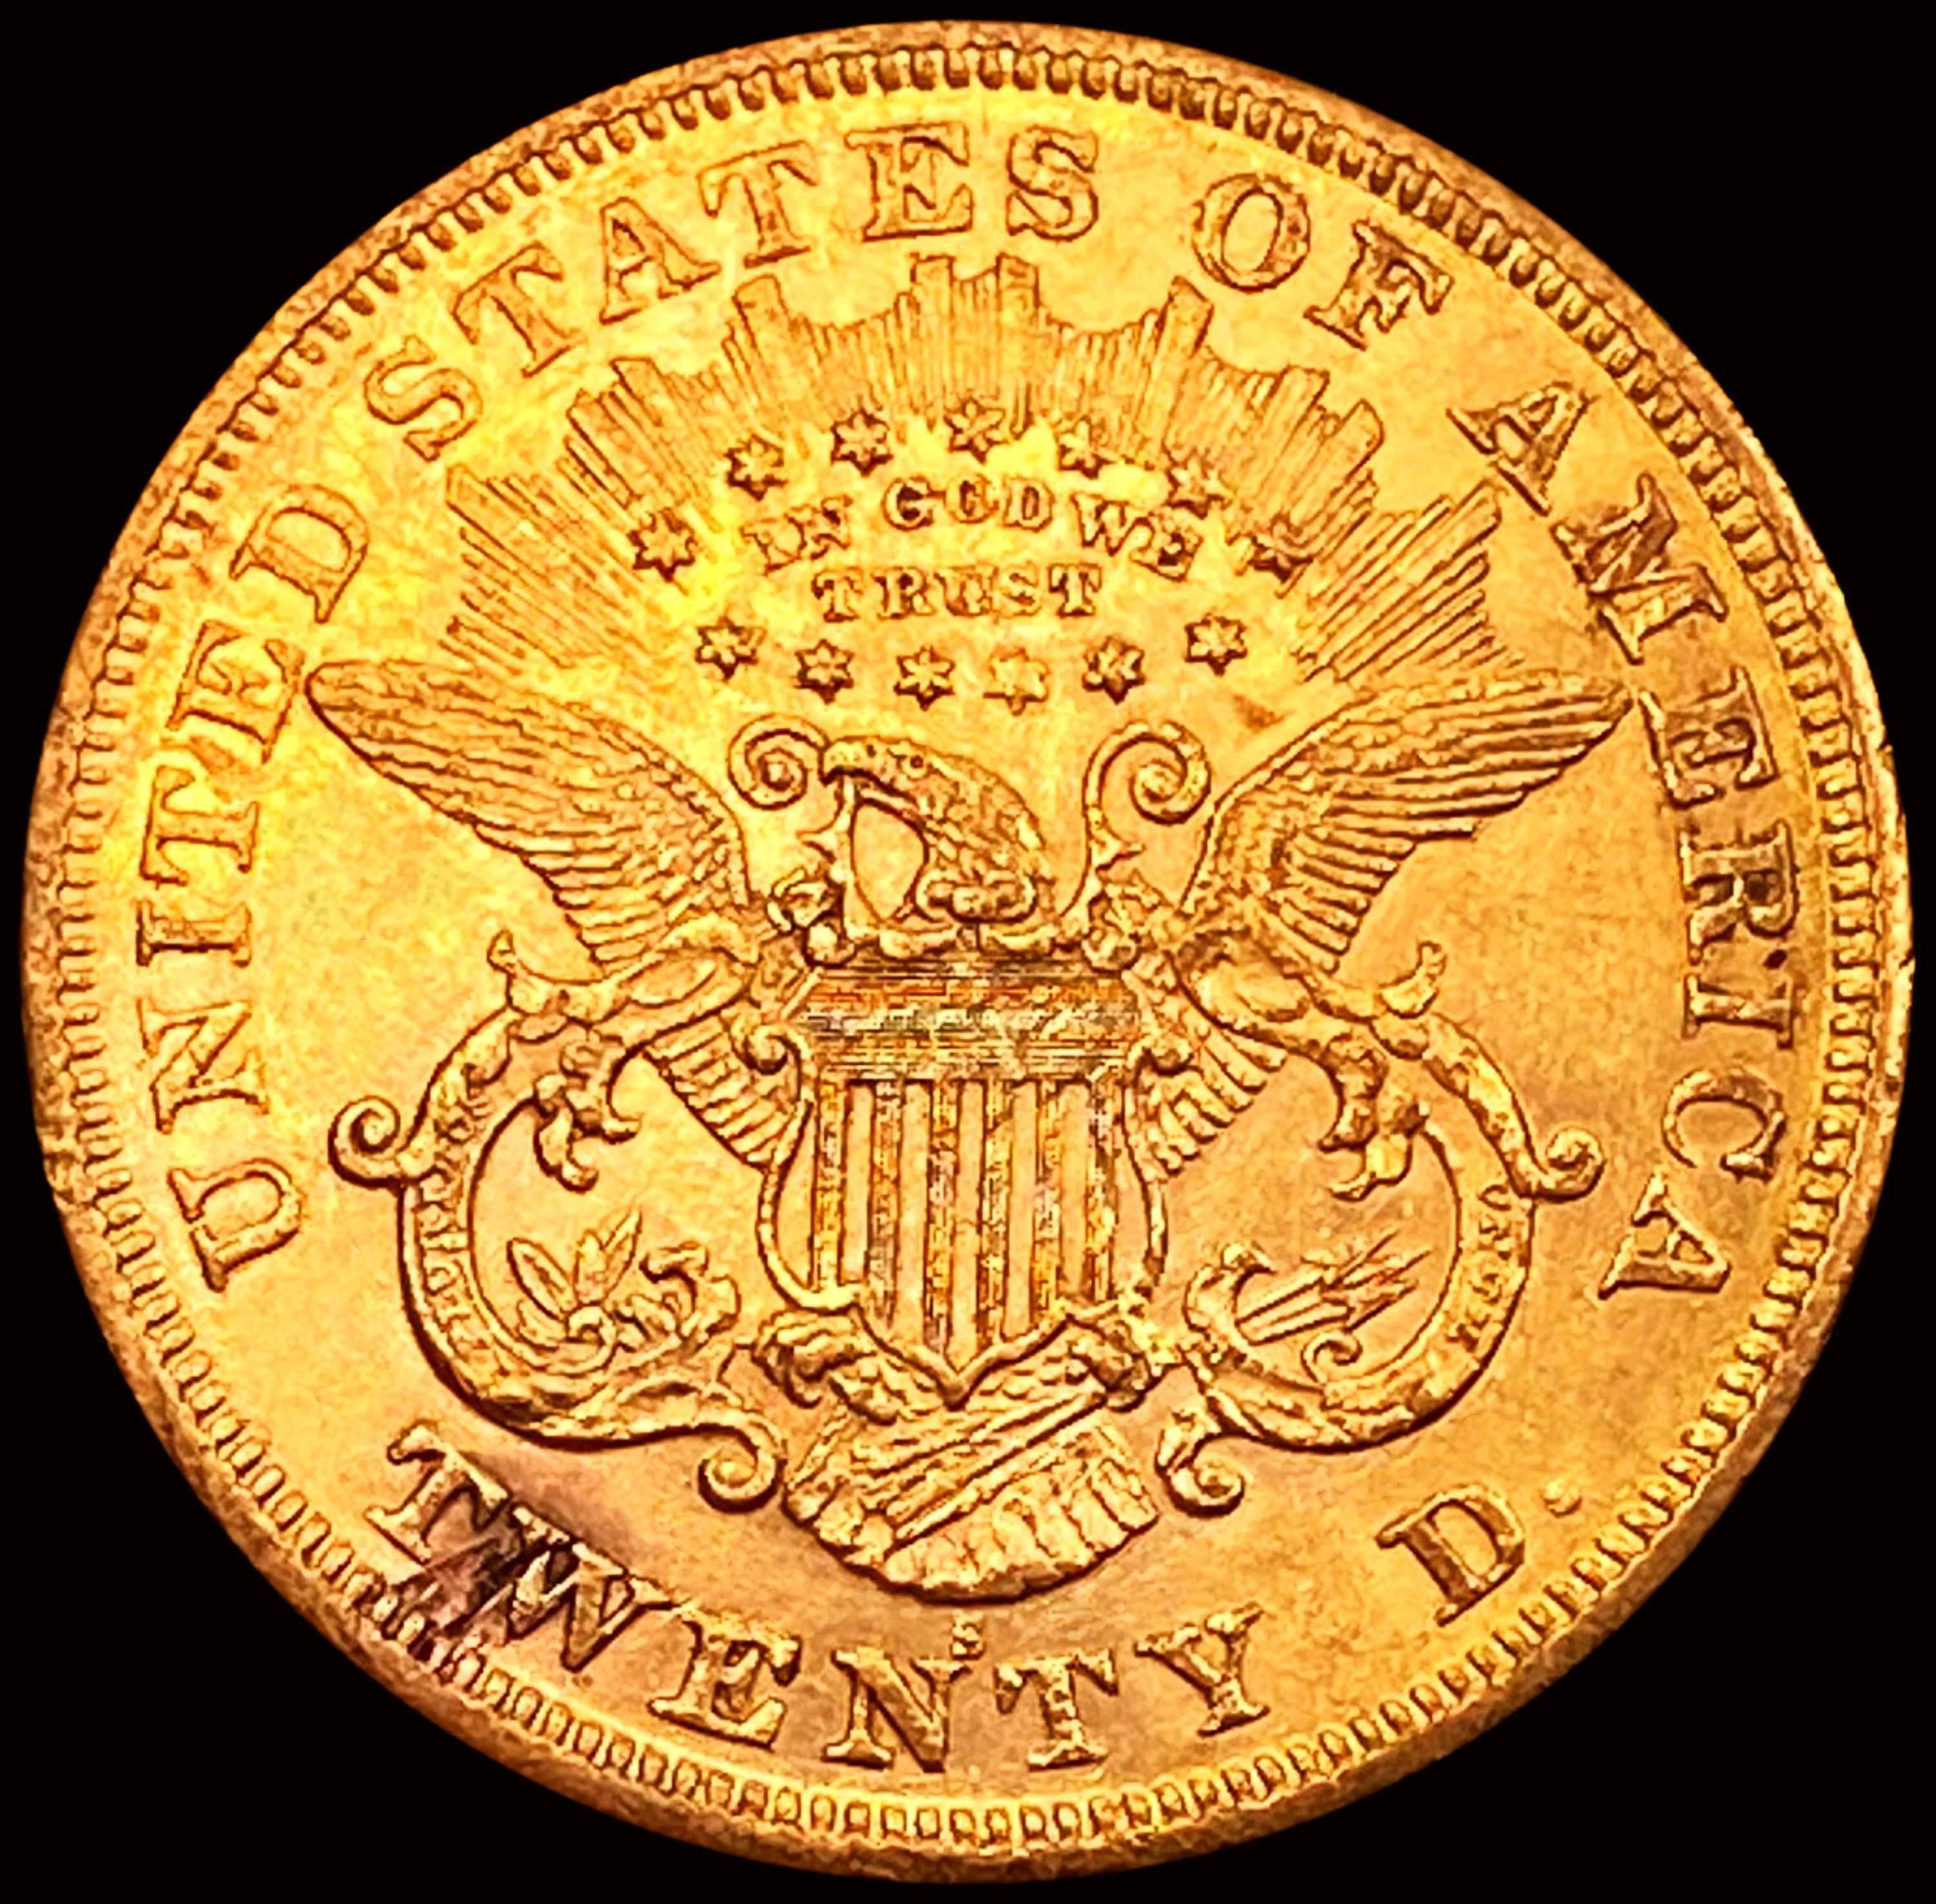 1873-S $20 Gold Double Eagle UNCIRCULATED